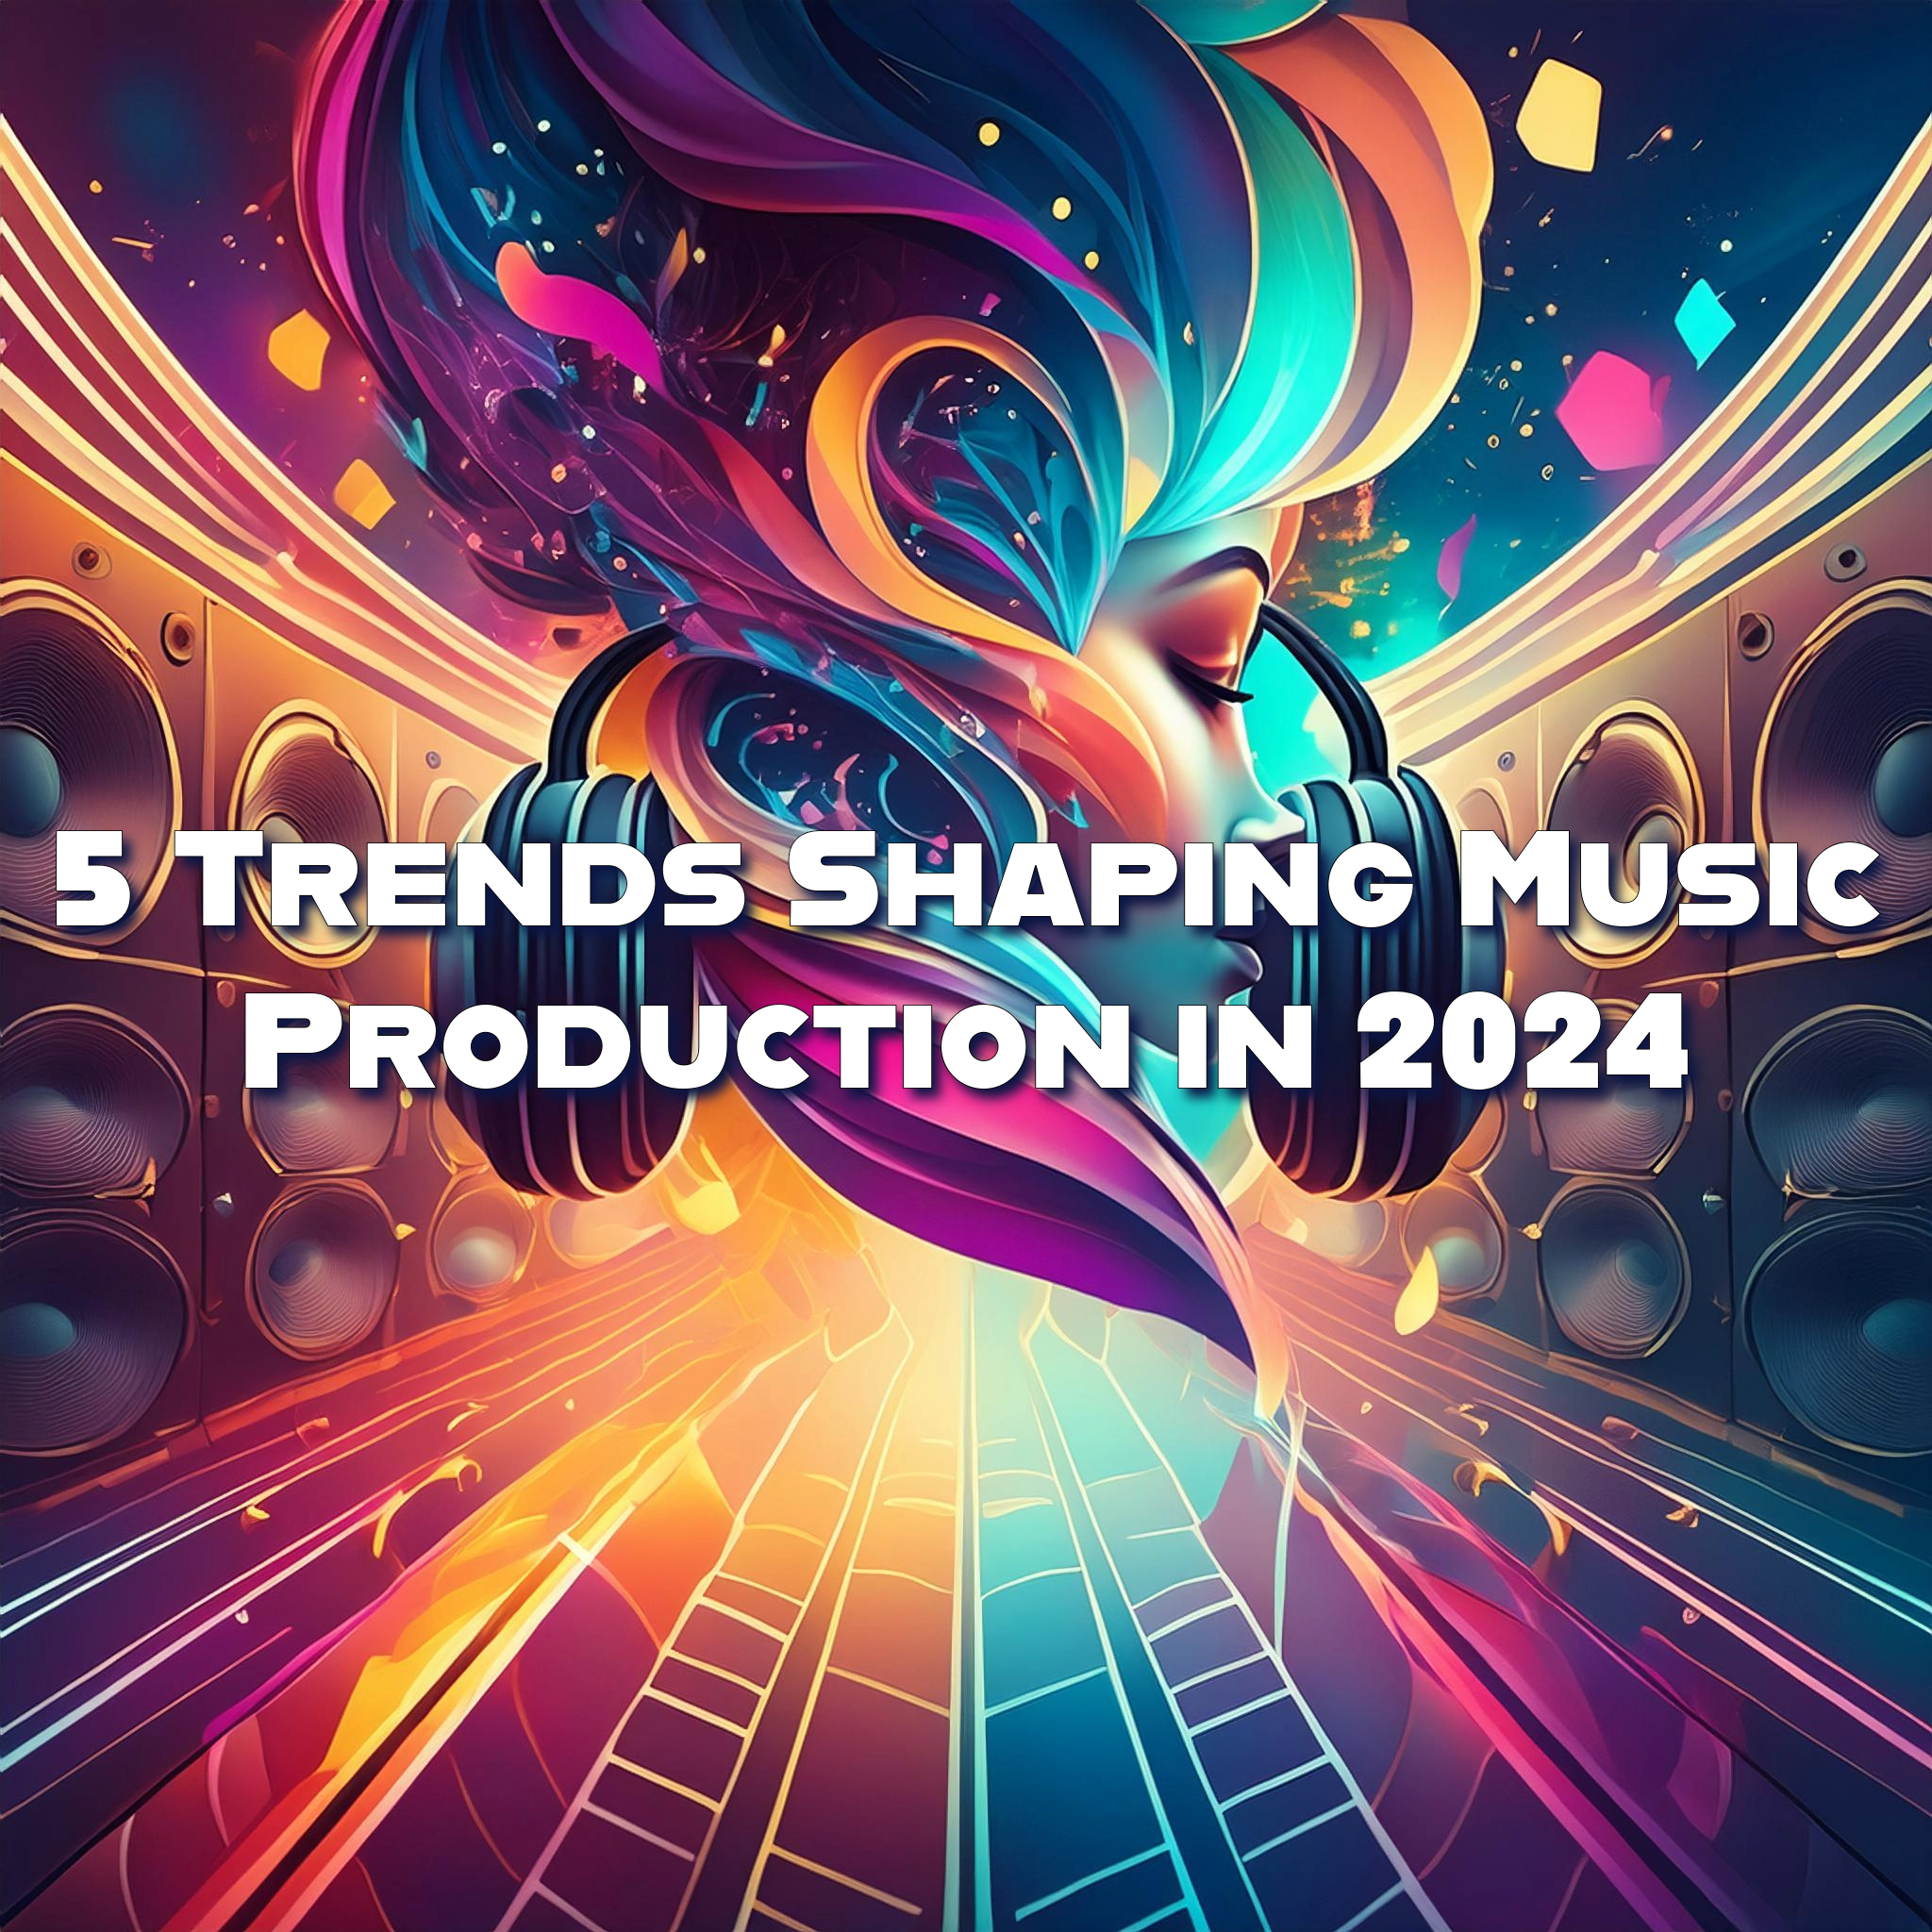 5 Trends Shaping Music Production in 2024